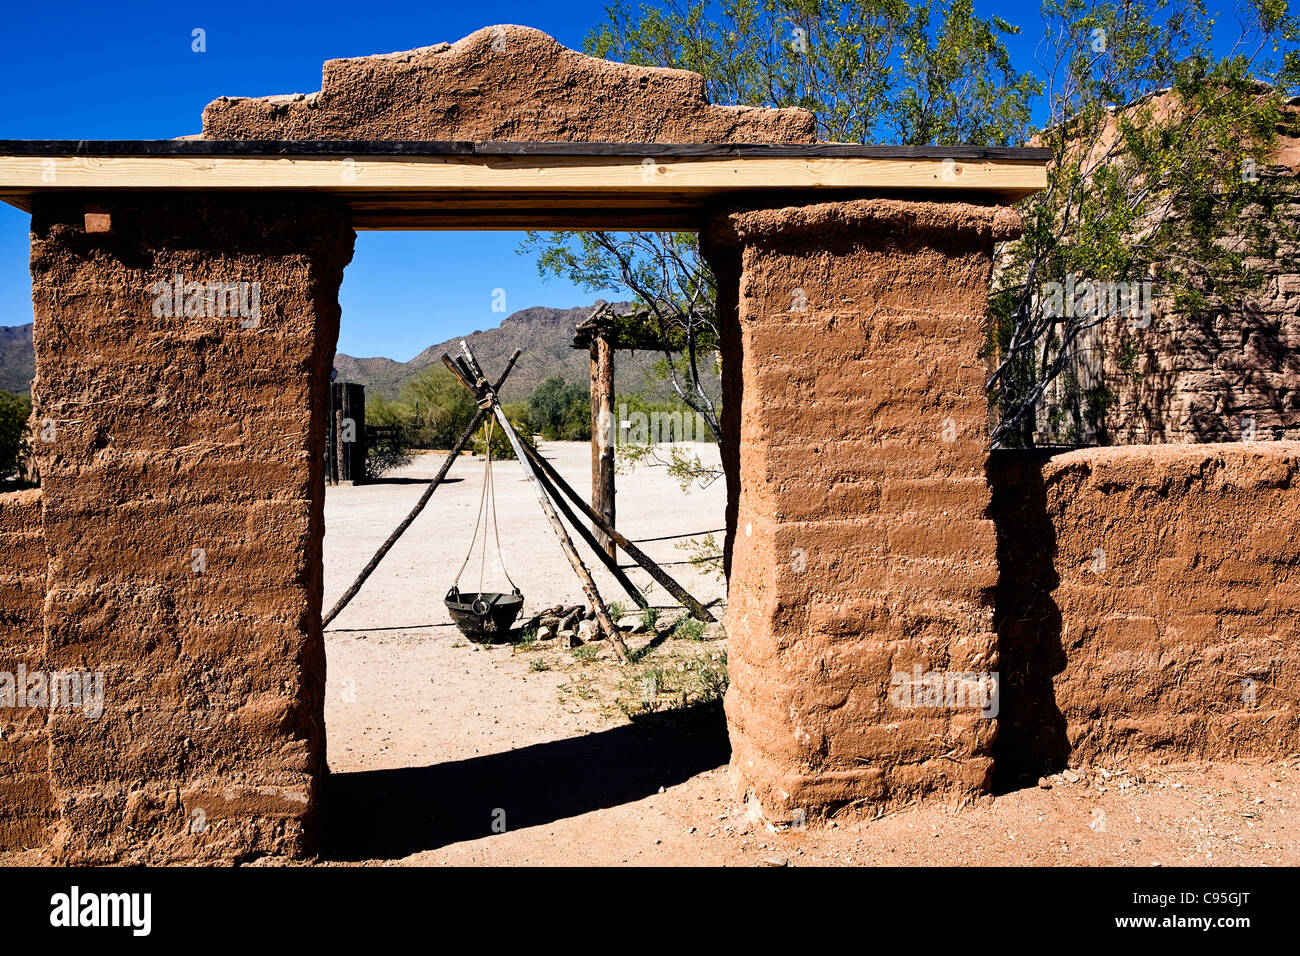 Image of an adobe structure at the Old Tucson Studios in Arizona Stock Photo